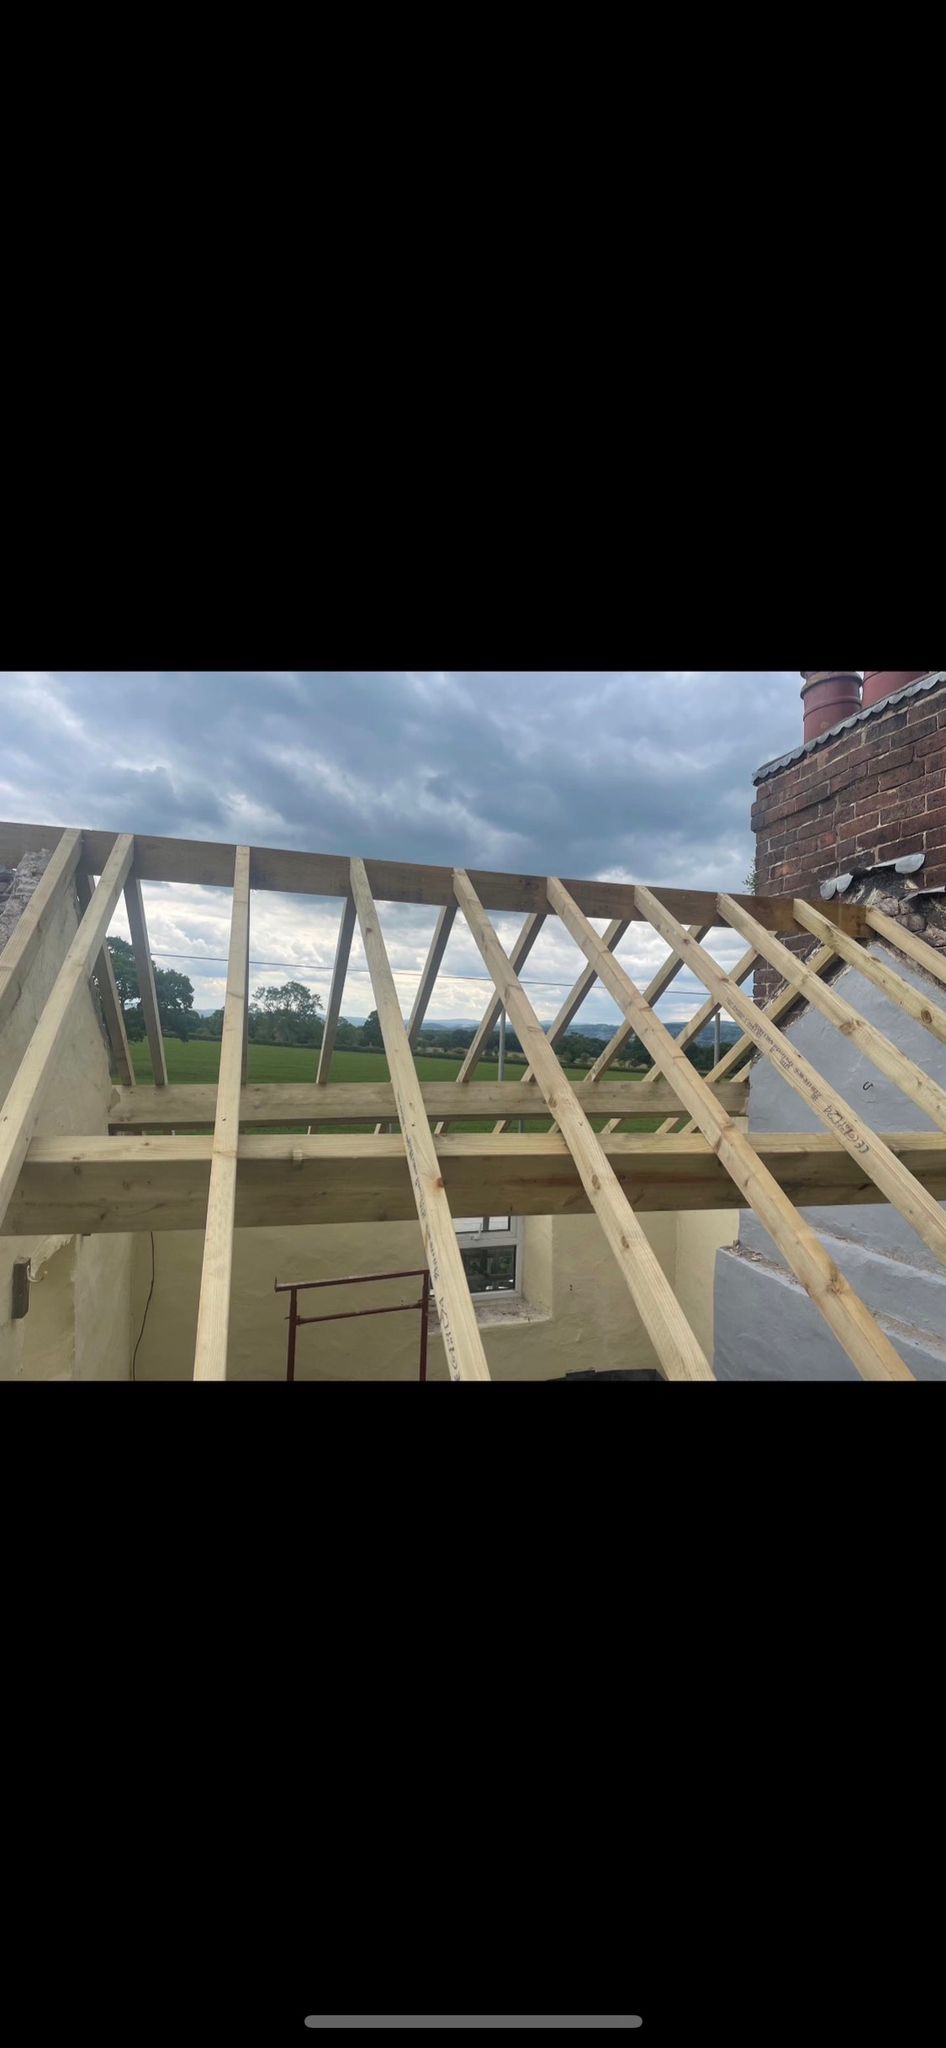 Timberwork Roof Contractors Glanwydden, LL31 - DD Roofing